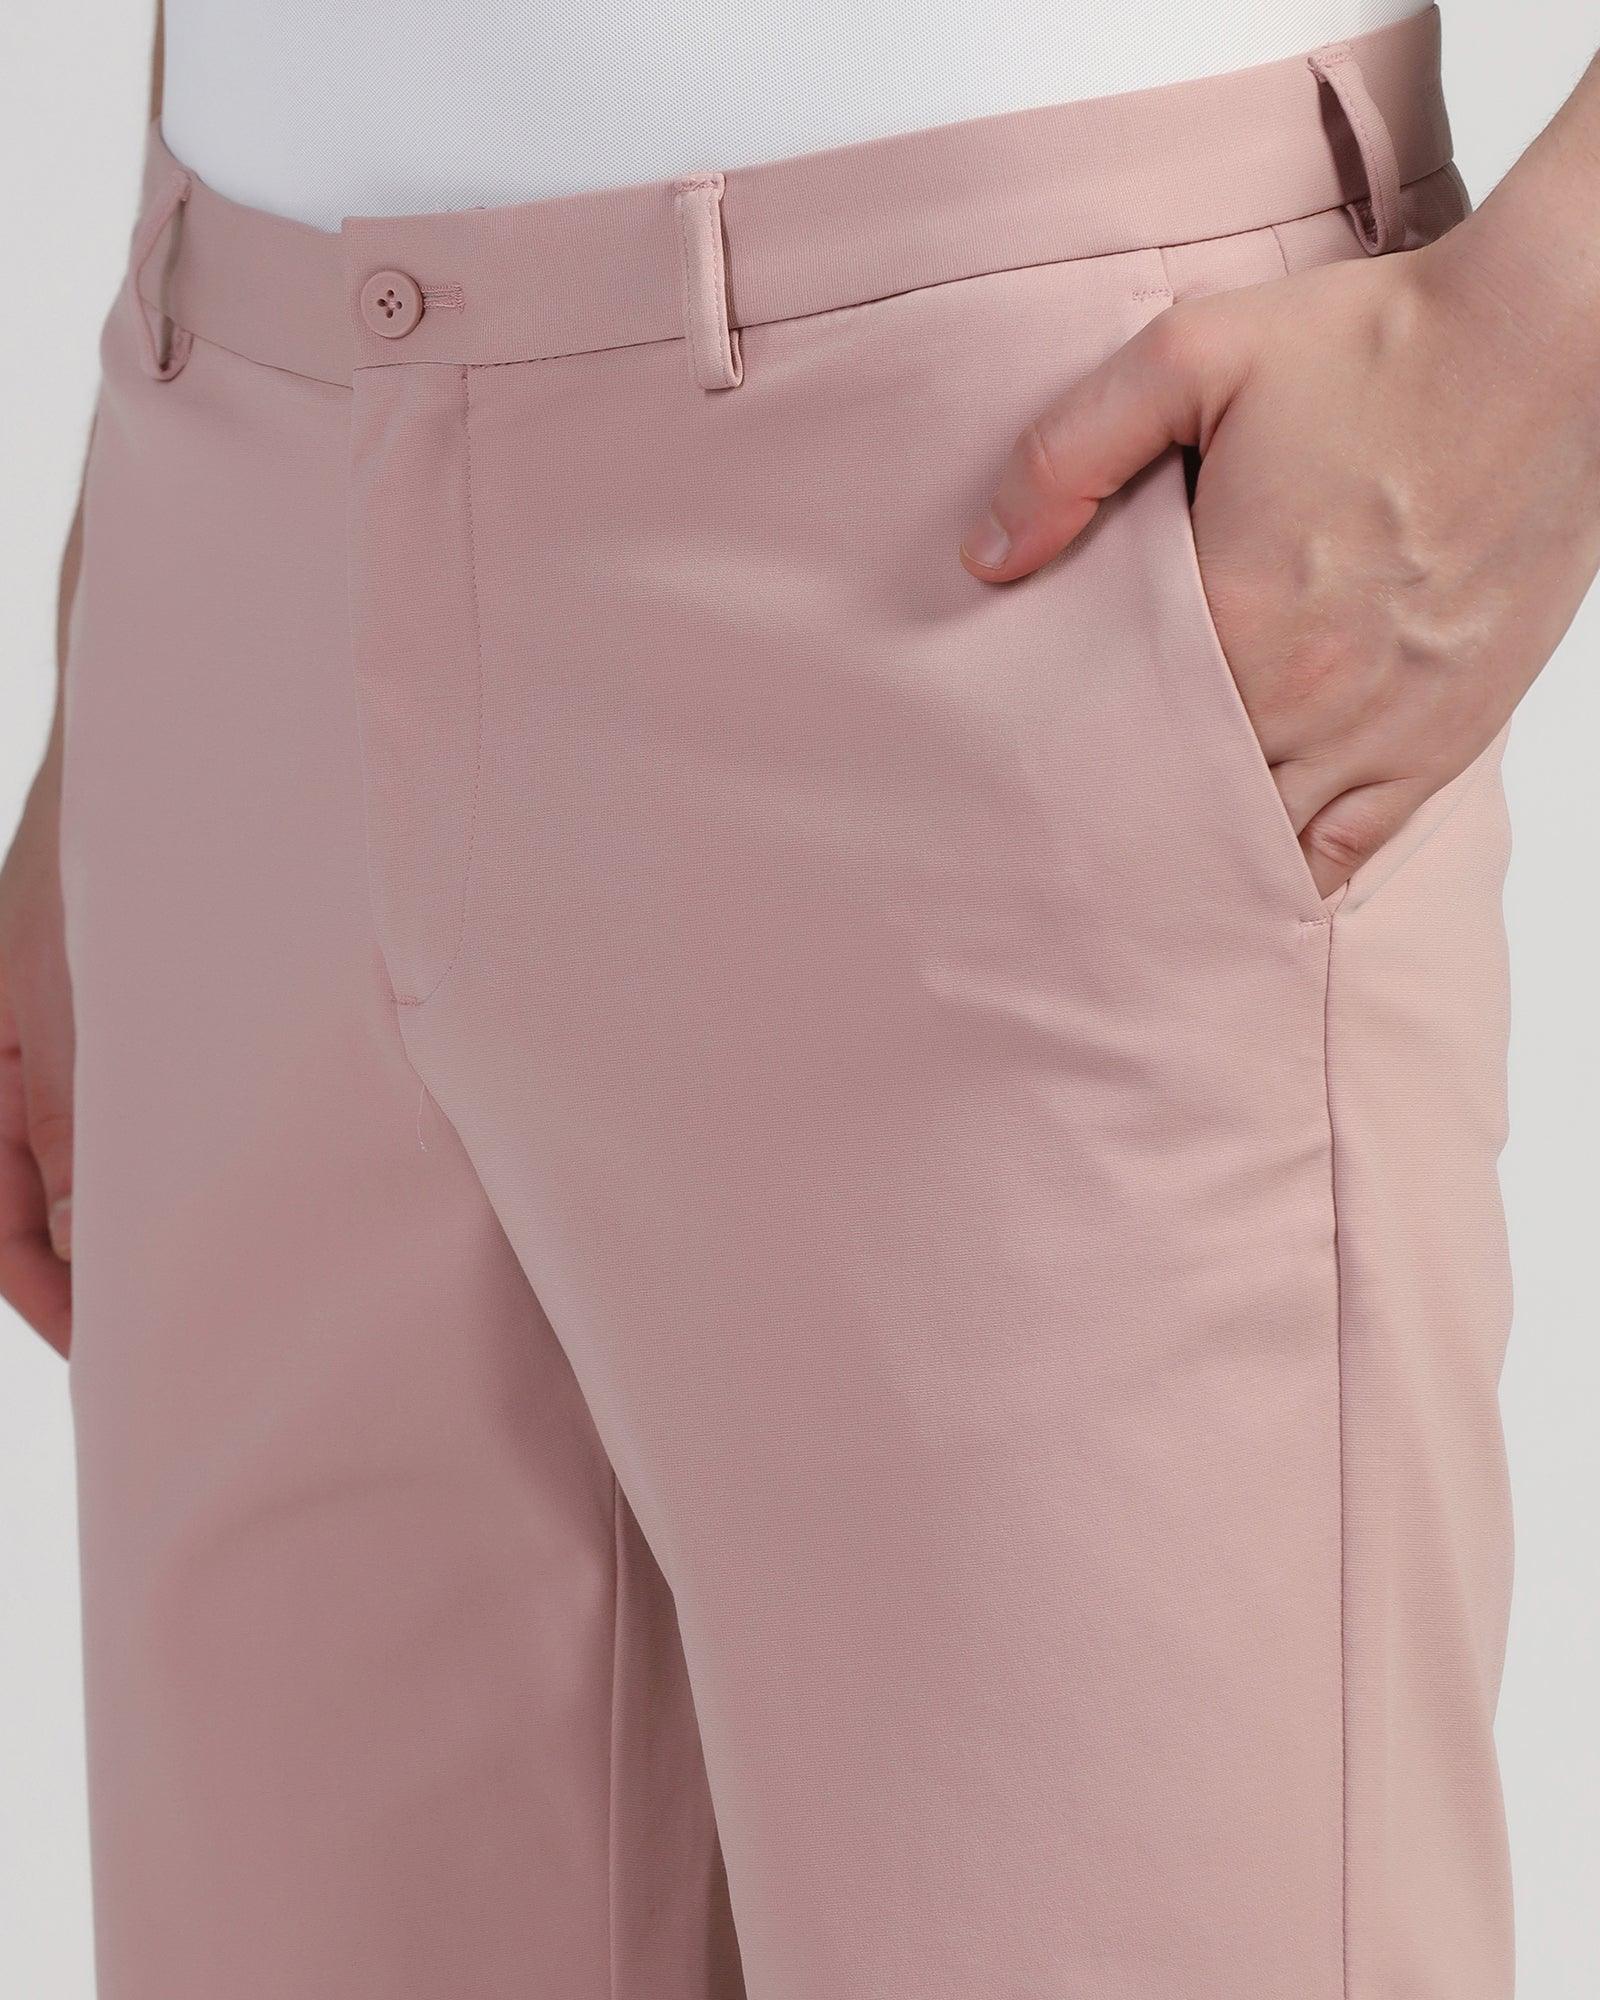 TechPro Casual Dusty Pink Solid Shorts - Serry